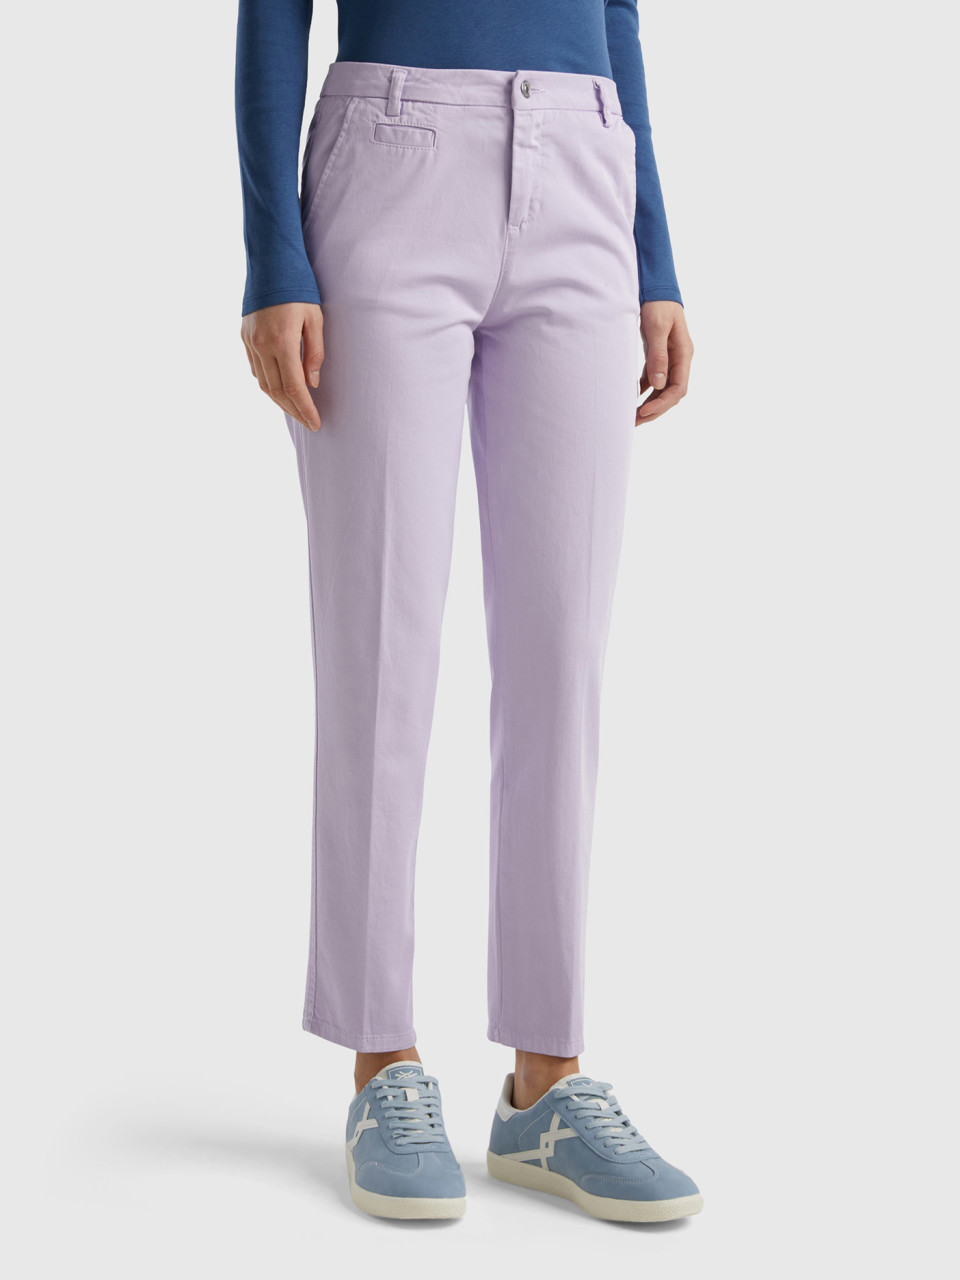 Benetton, Lilac Slim Fit Cotton Chinos, Lilac, Women